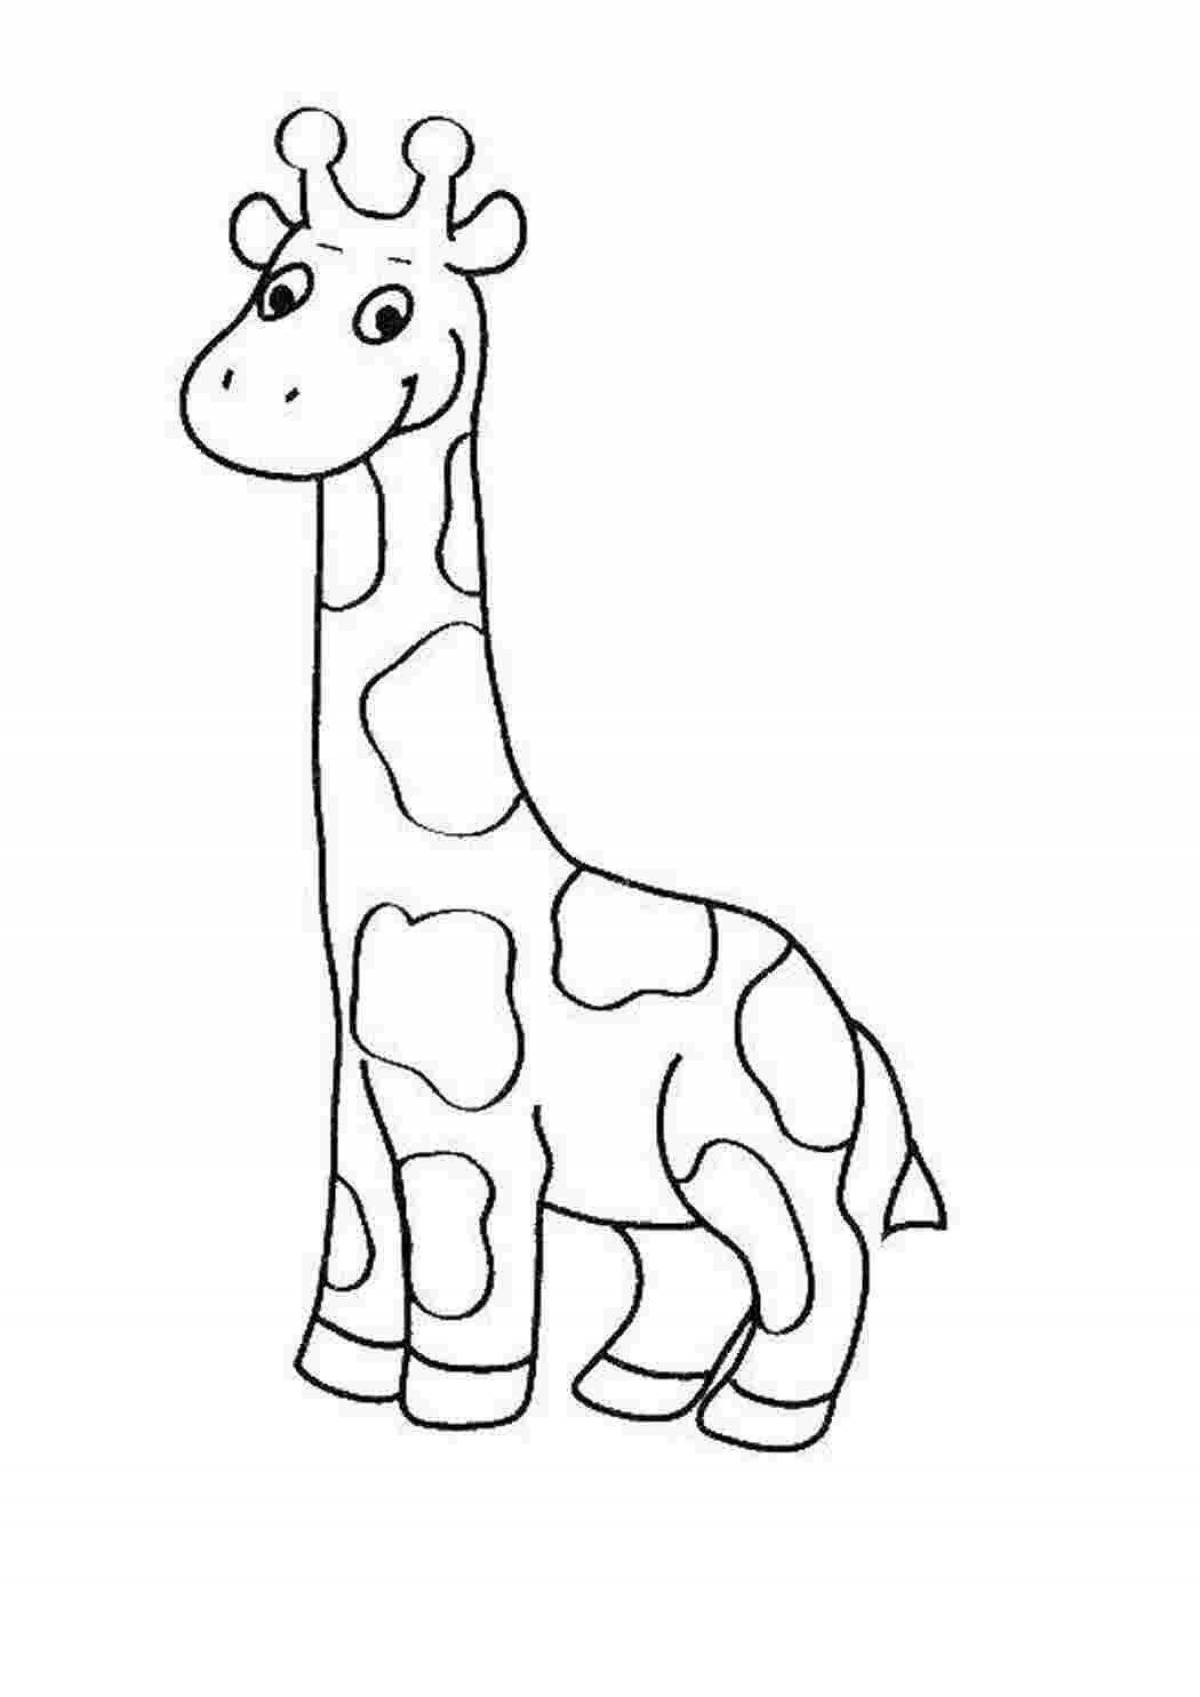 Awesome giraffe coloring pages for 3-4 year olds